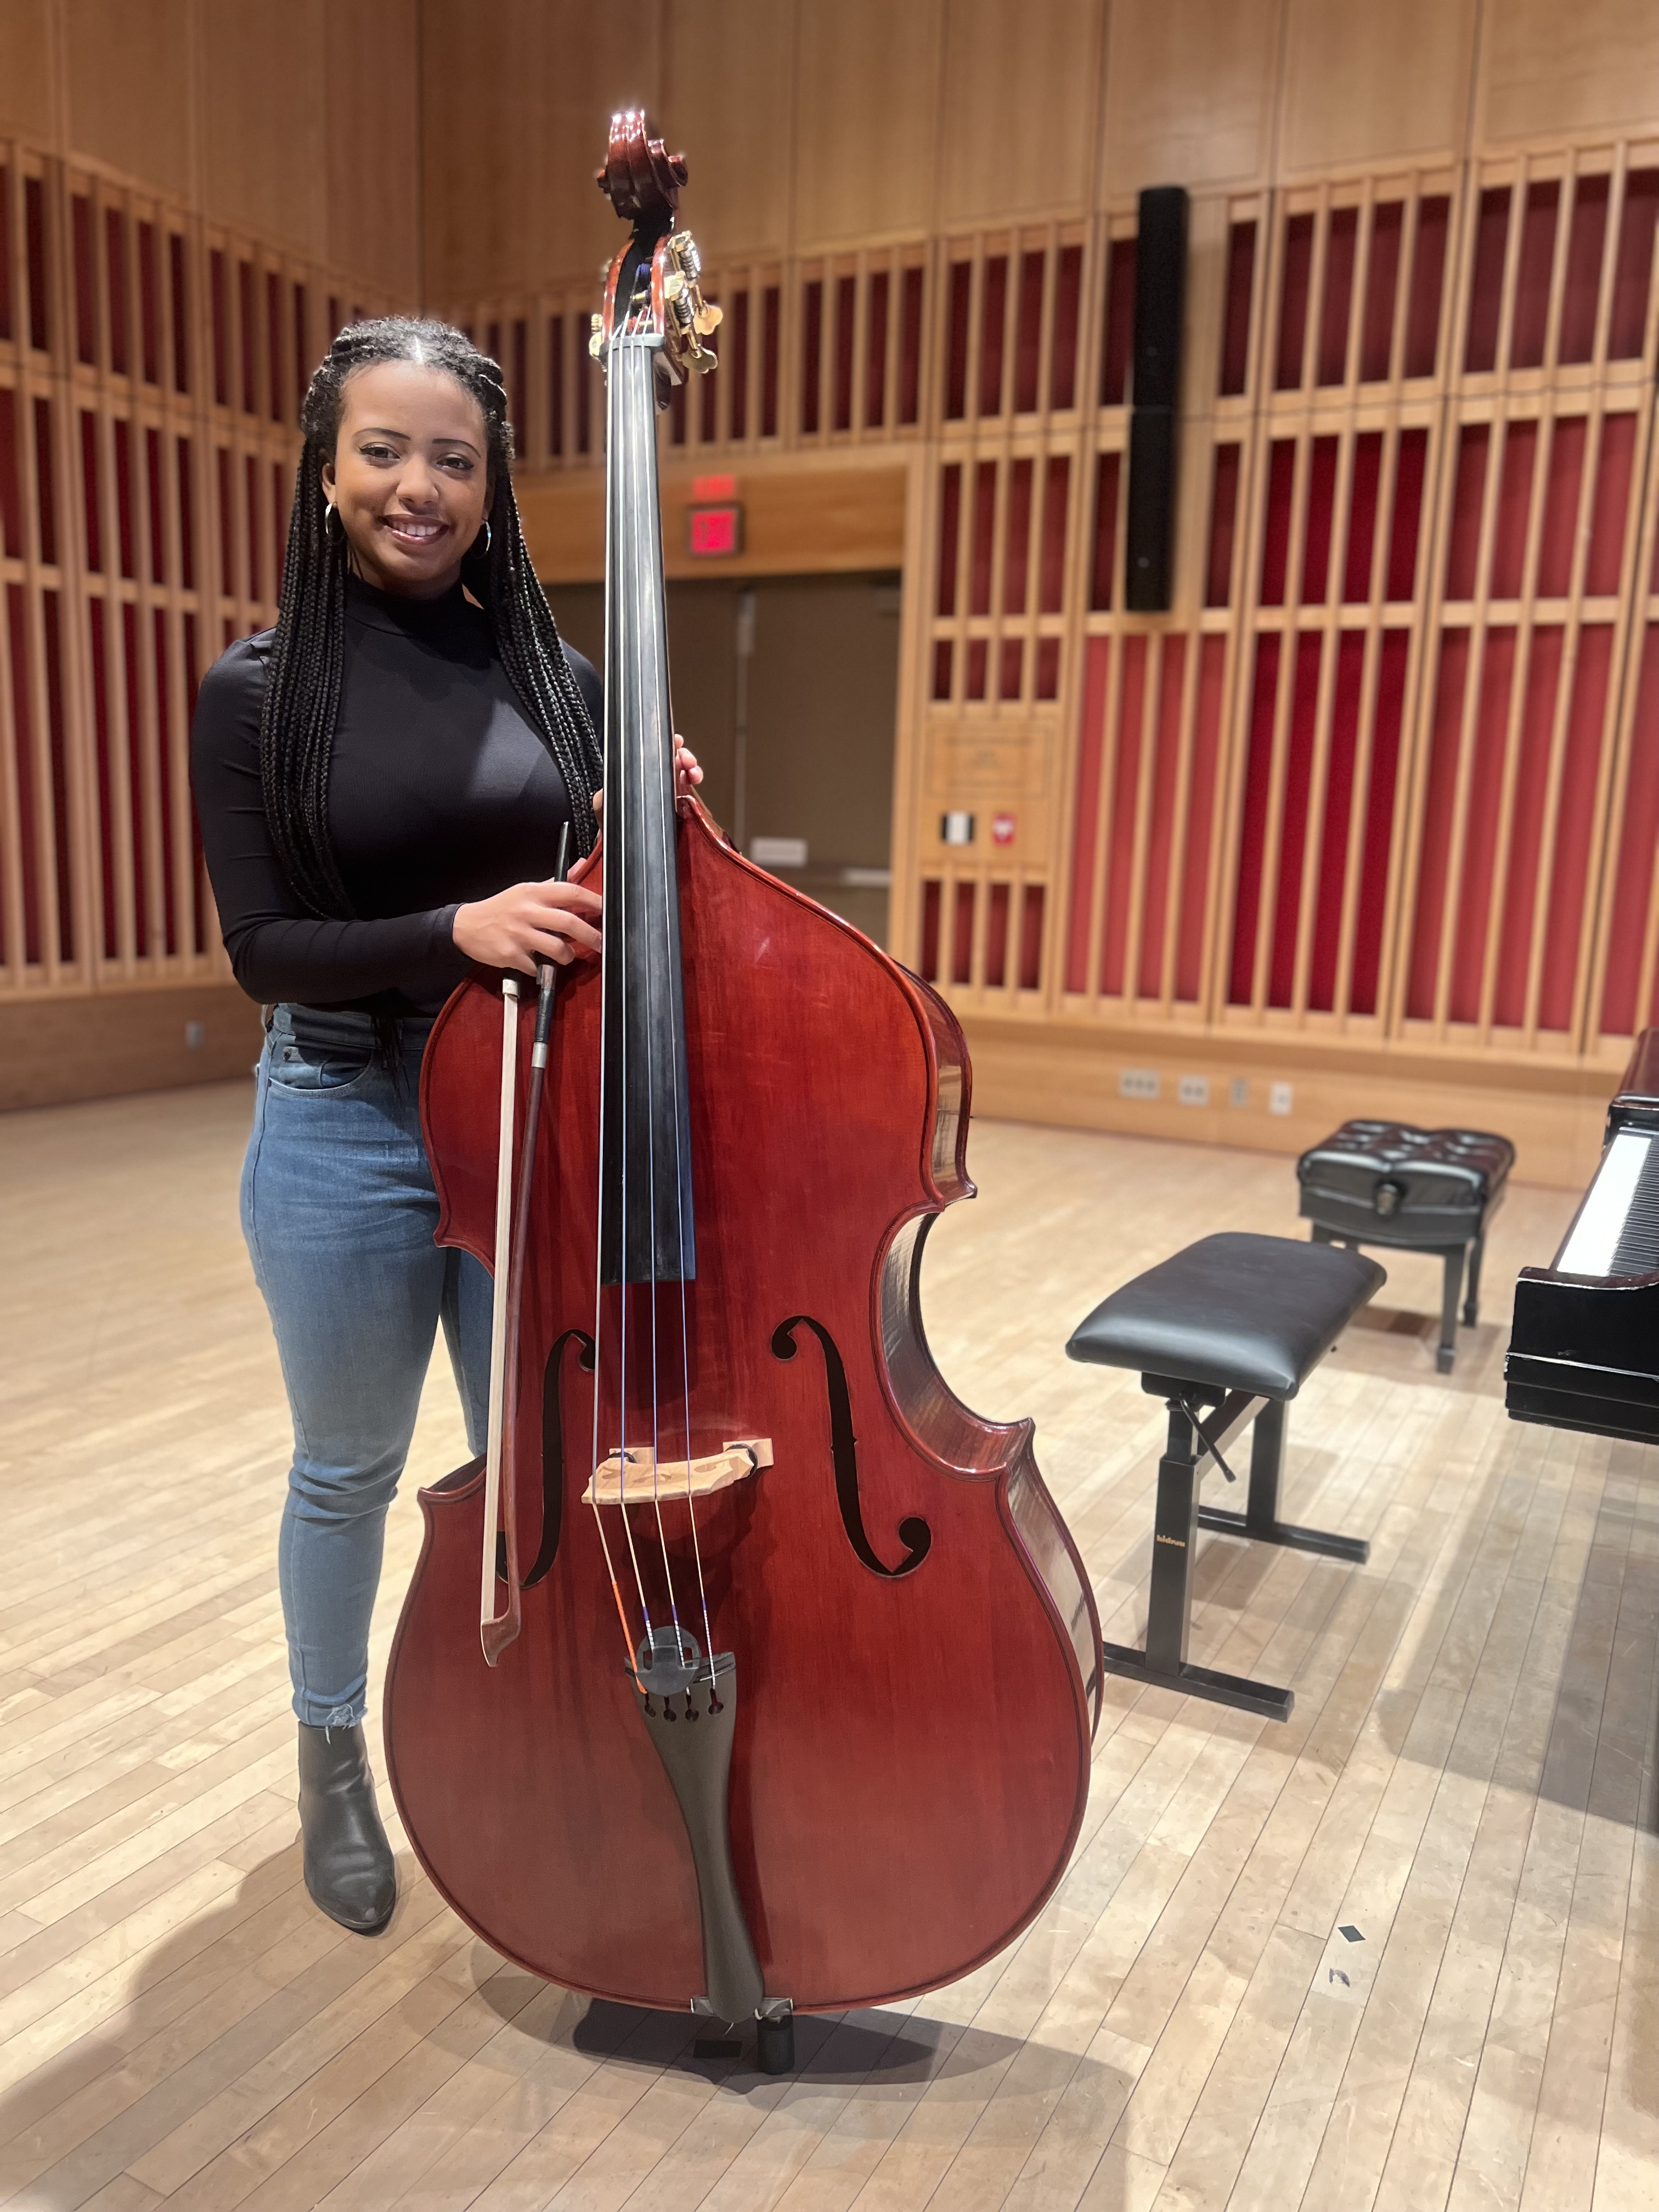 Degree Recital: Elizabeth Liotta, double bass, with violin, piano and seven double-bassists